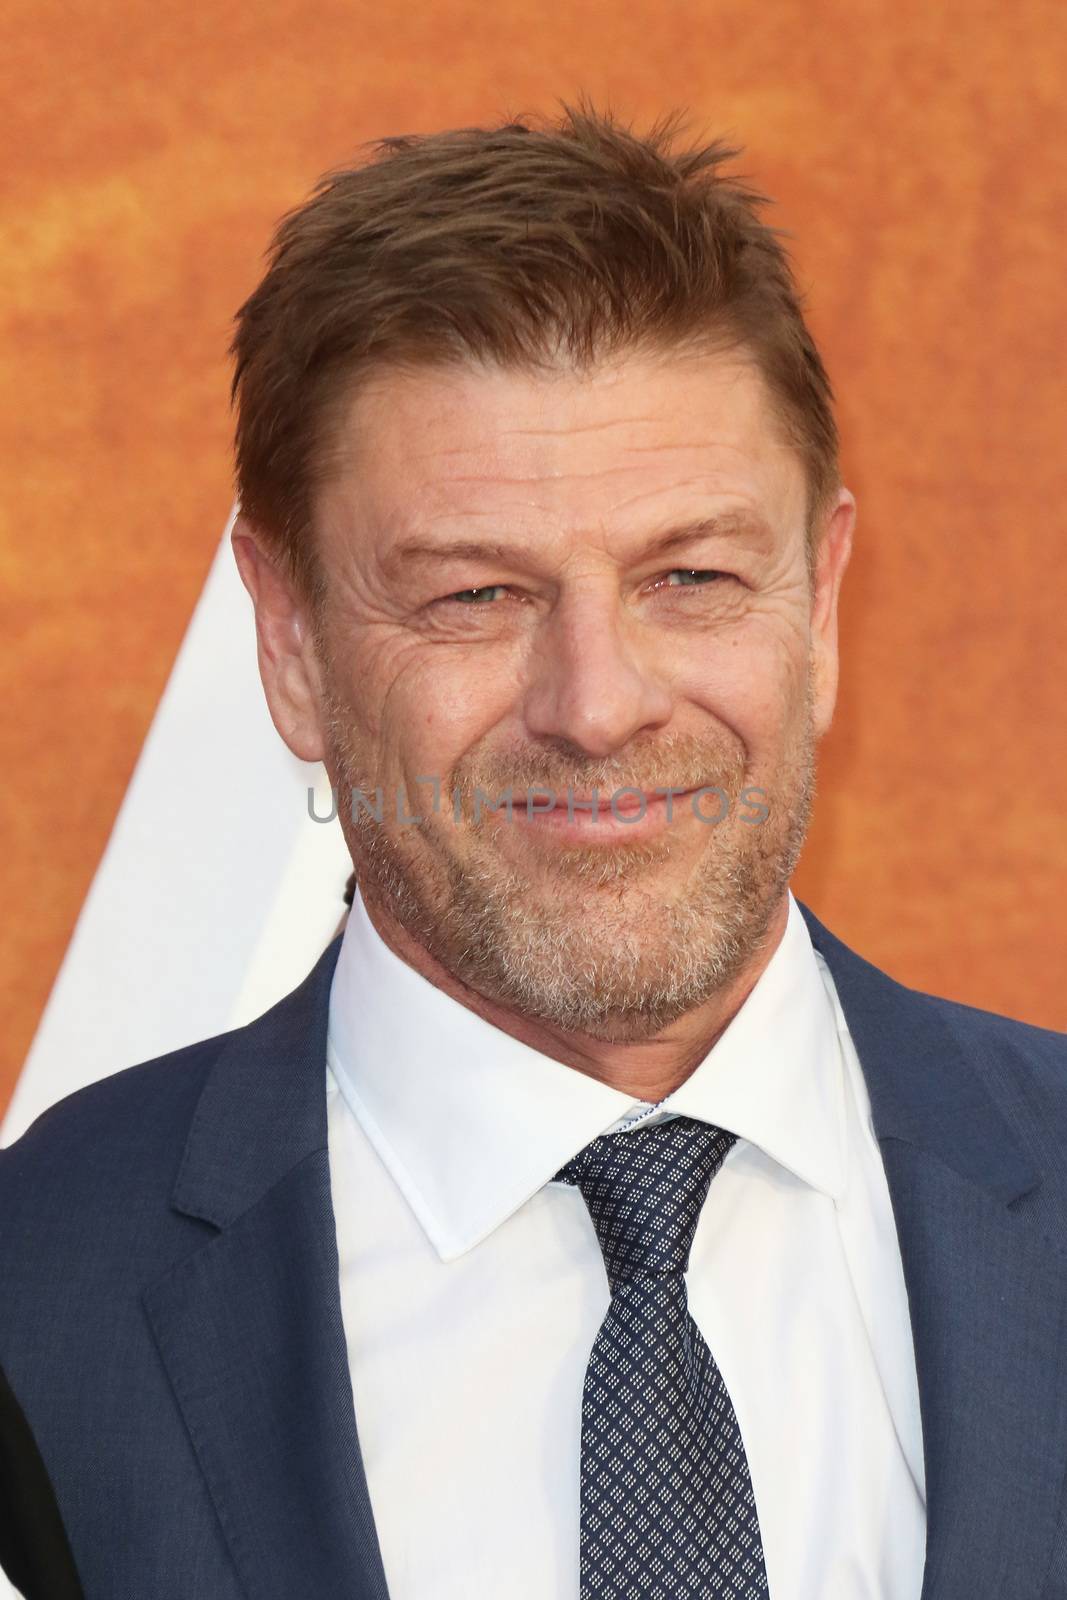 ENGLAND, London: Sean Bean attends the European premiere of The Martian in Leicester Square in London, UK on September 24, 2015